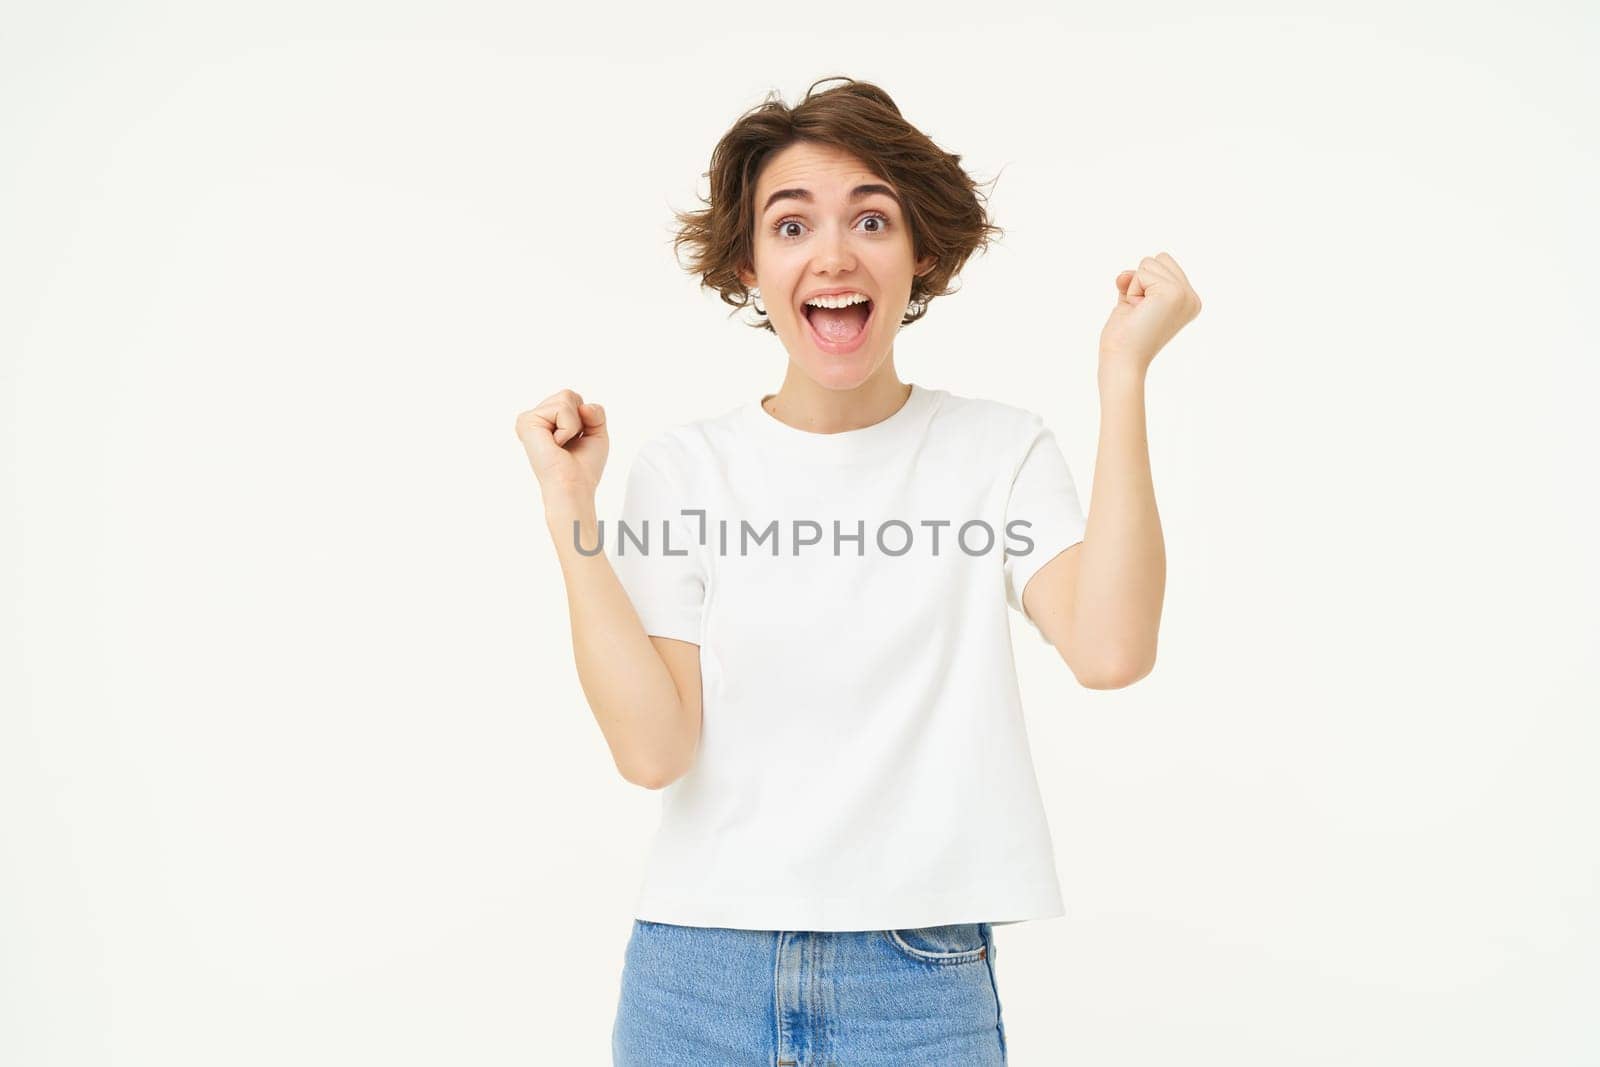 Portrait of happy, excited young woman winning, triumphing, feeling like champion, posing over white background.